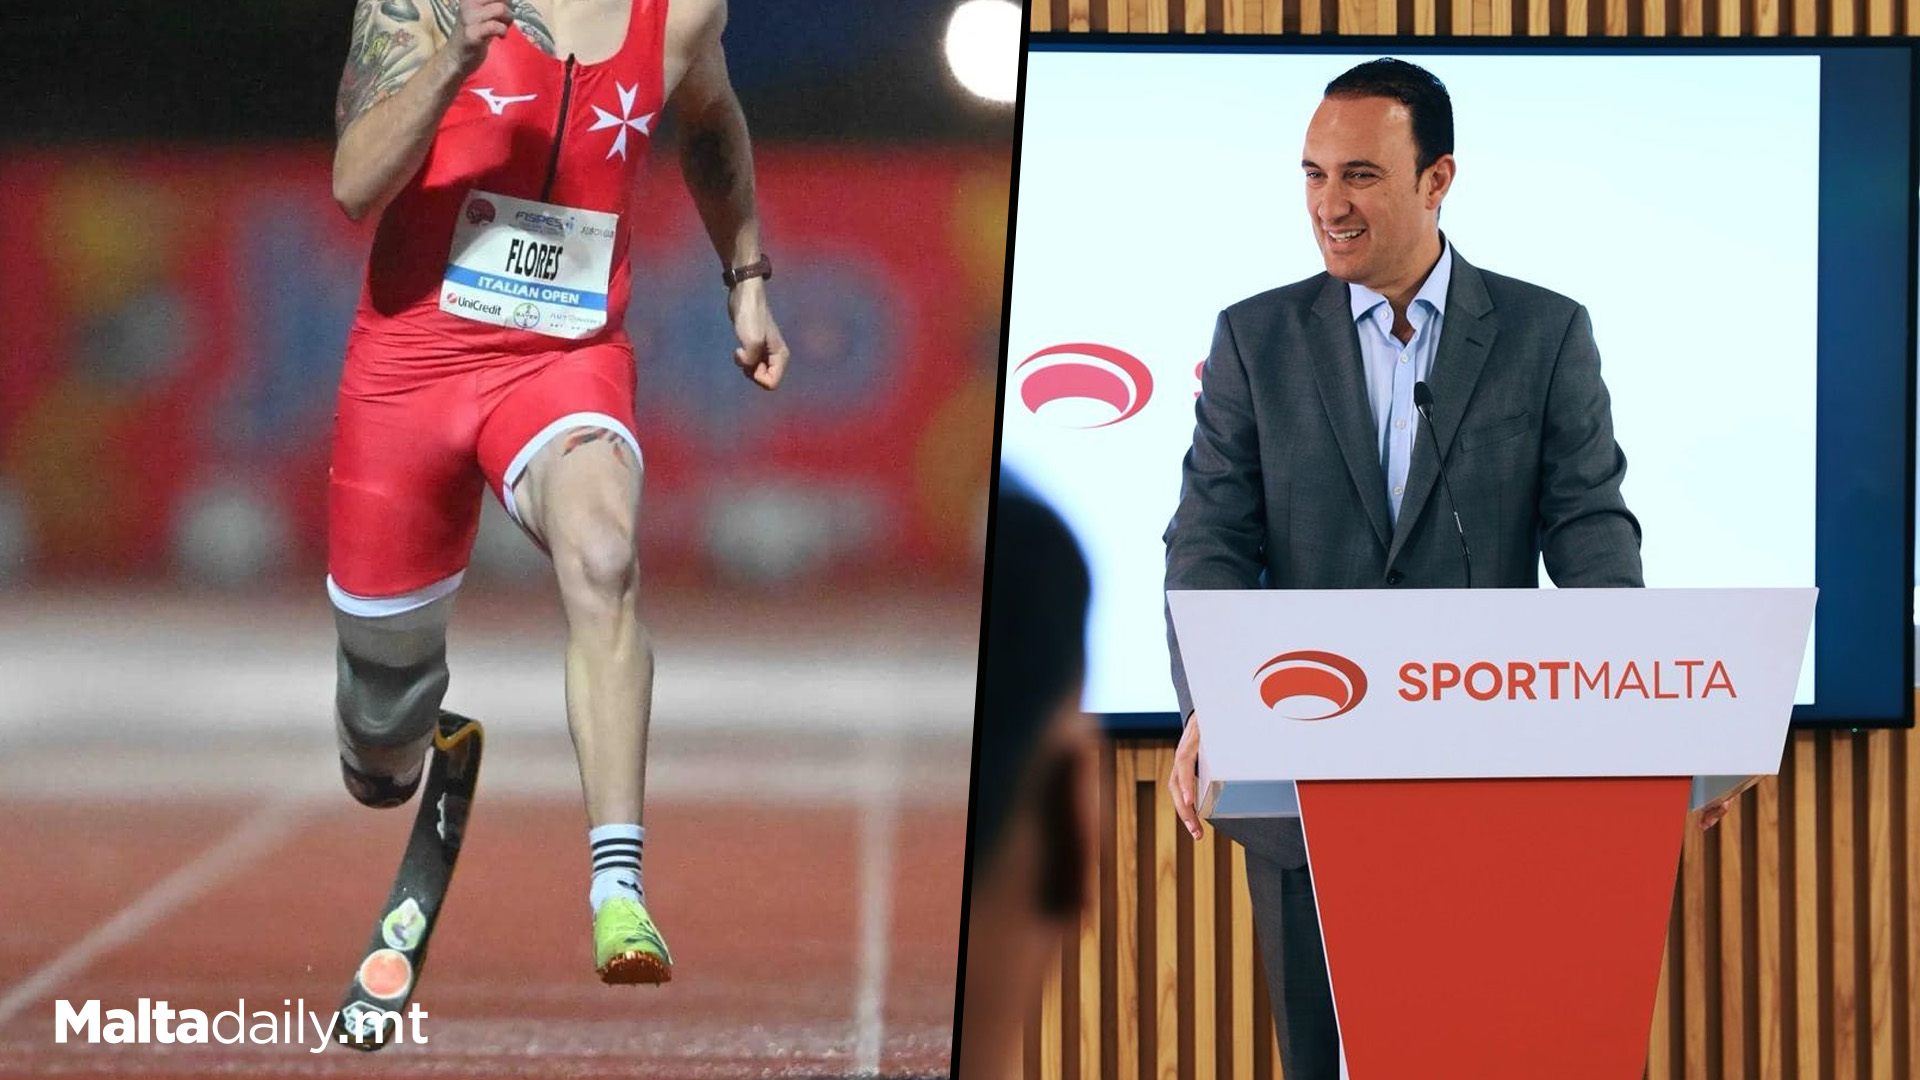 €250,000 To Help Paralympic Athletes In Malta